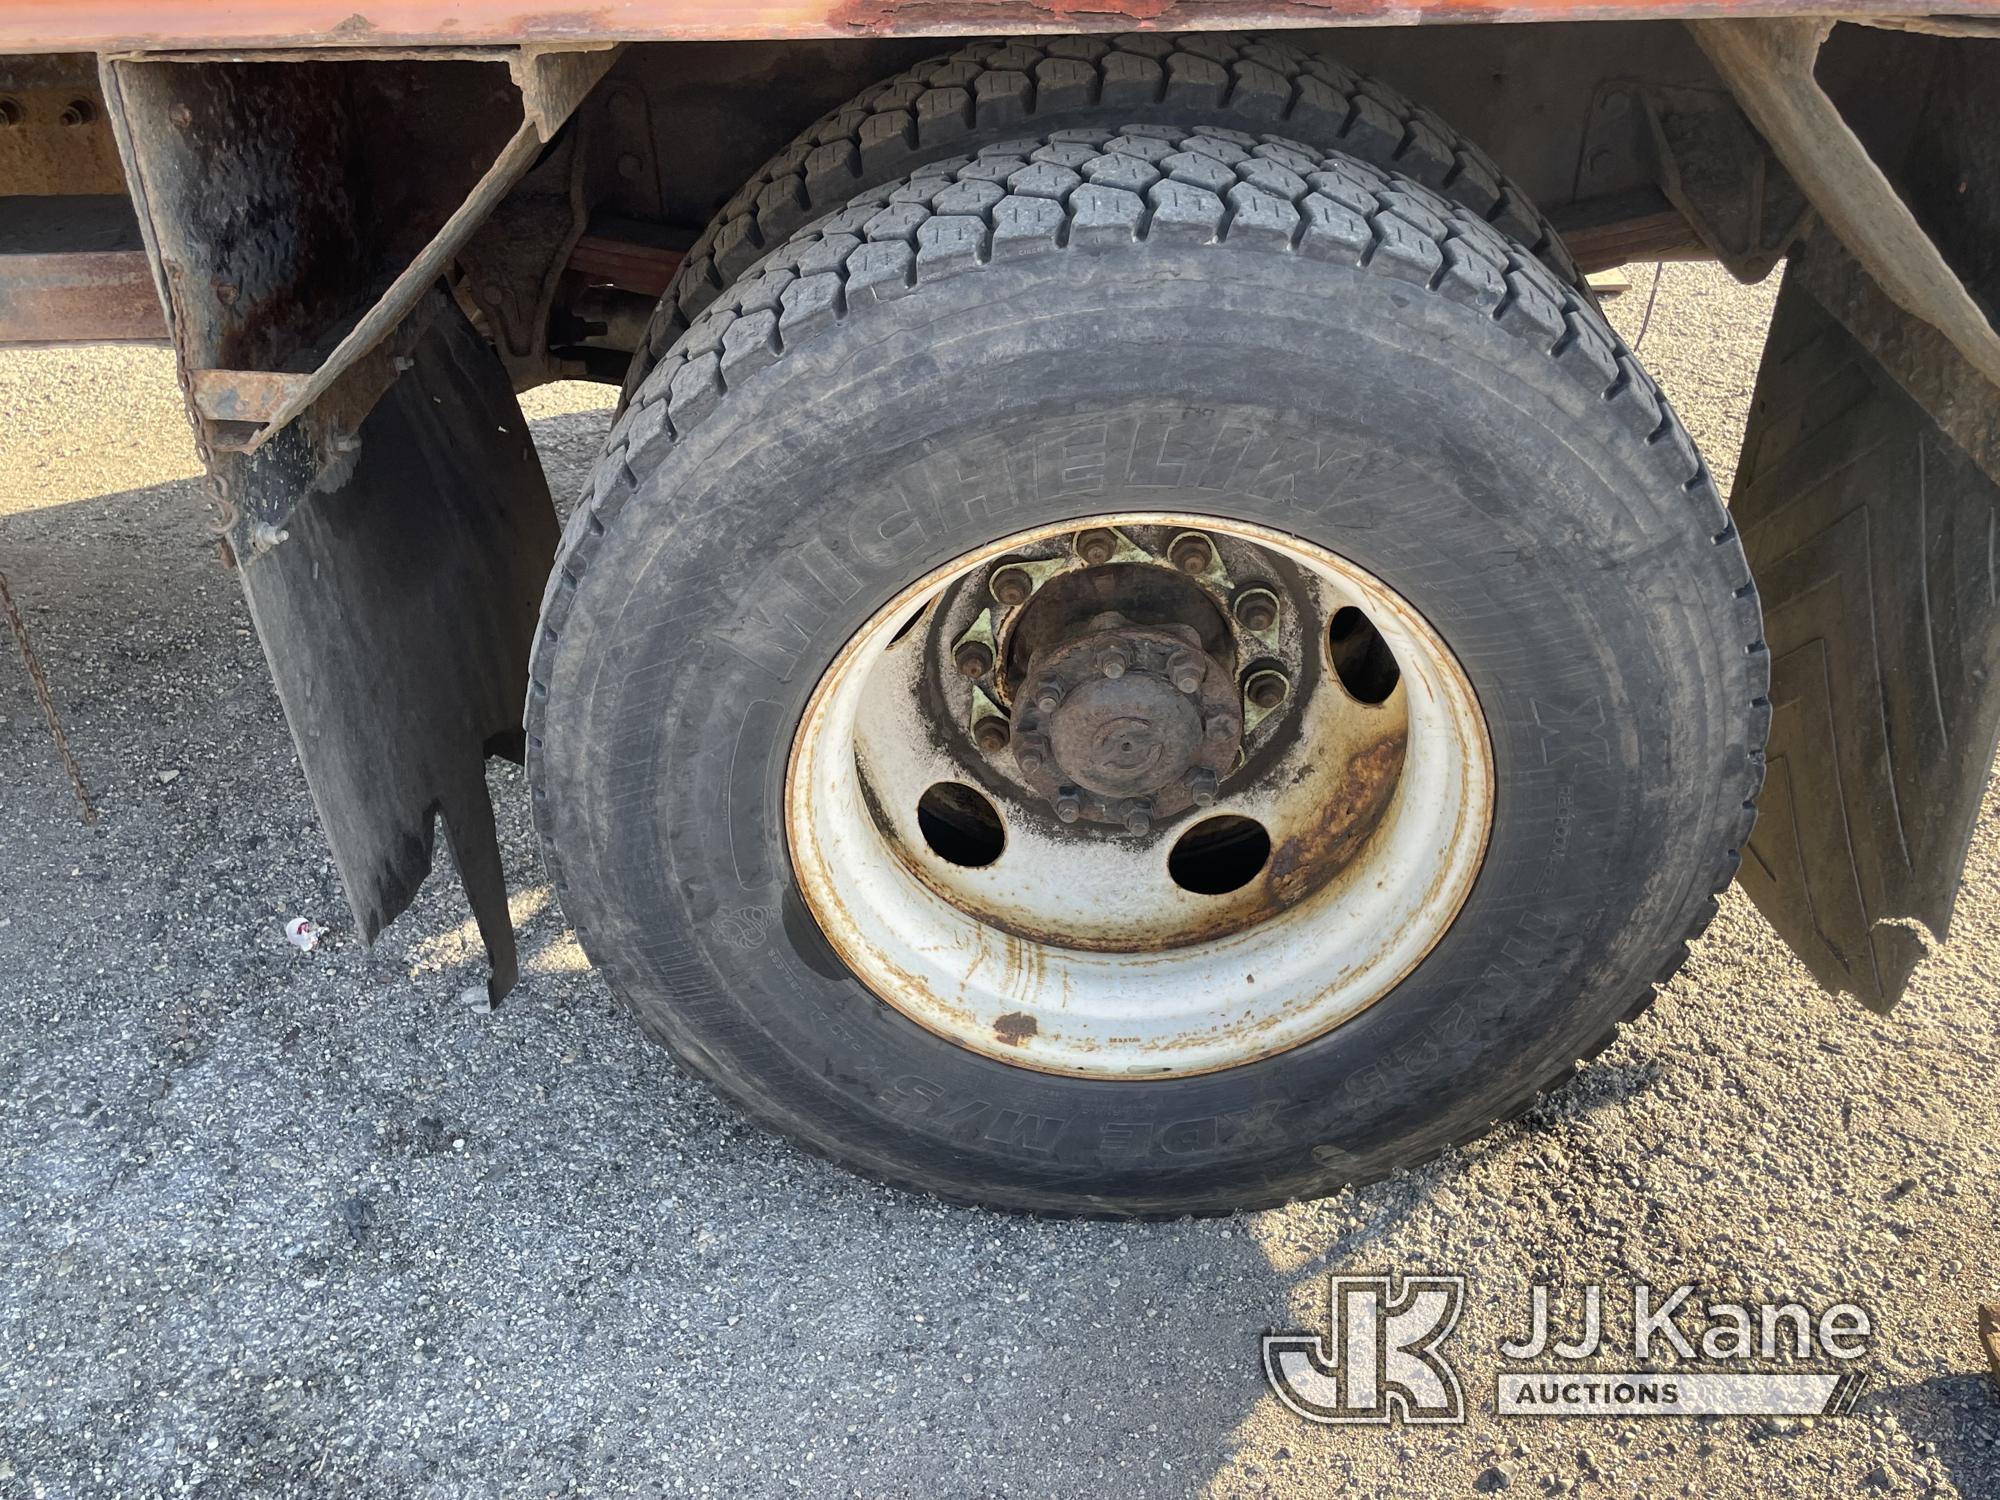 (Plymouth Meeting, PA) Terex Commander 4047, Digger Derrick rear mounted on 2011 Ford F750 Utility T